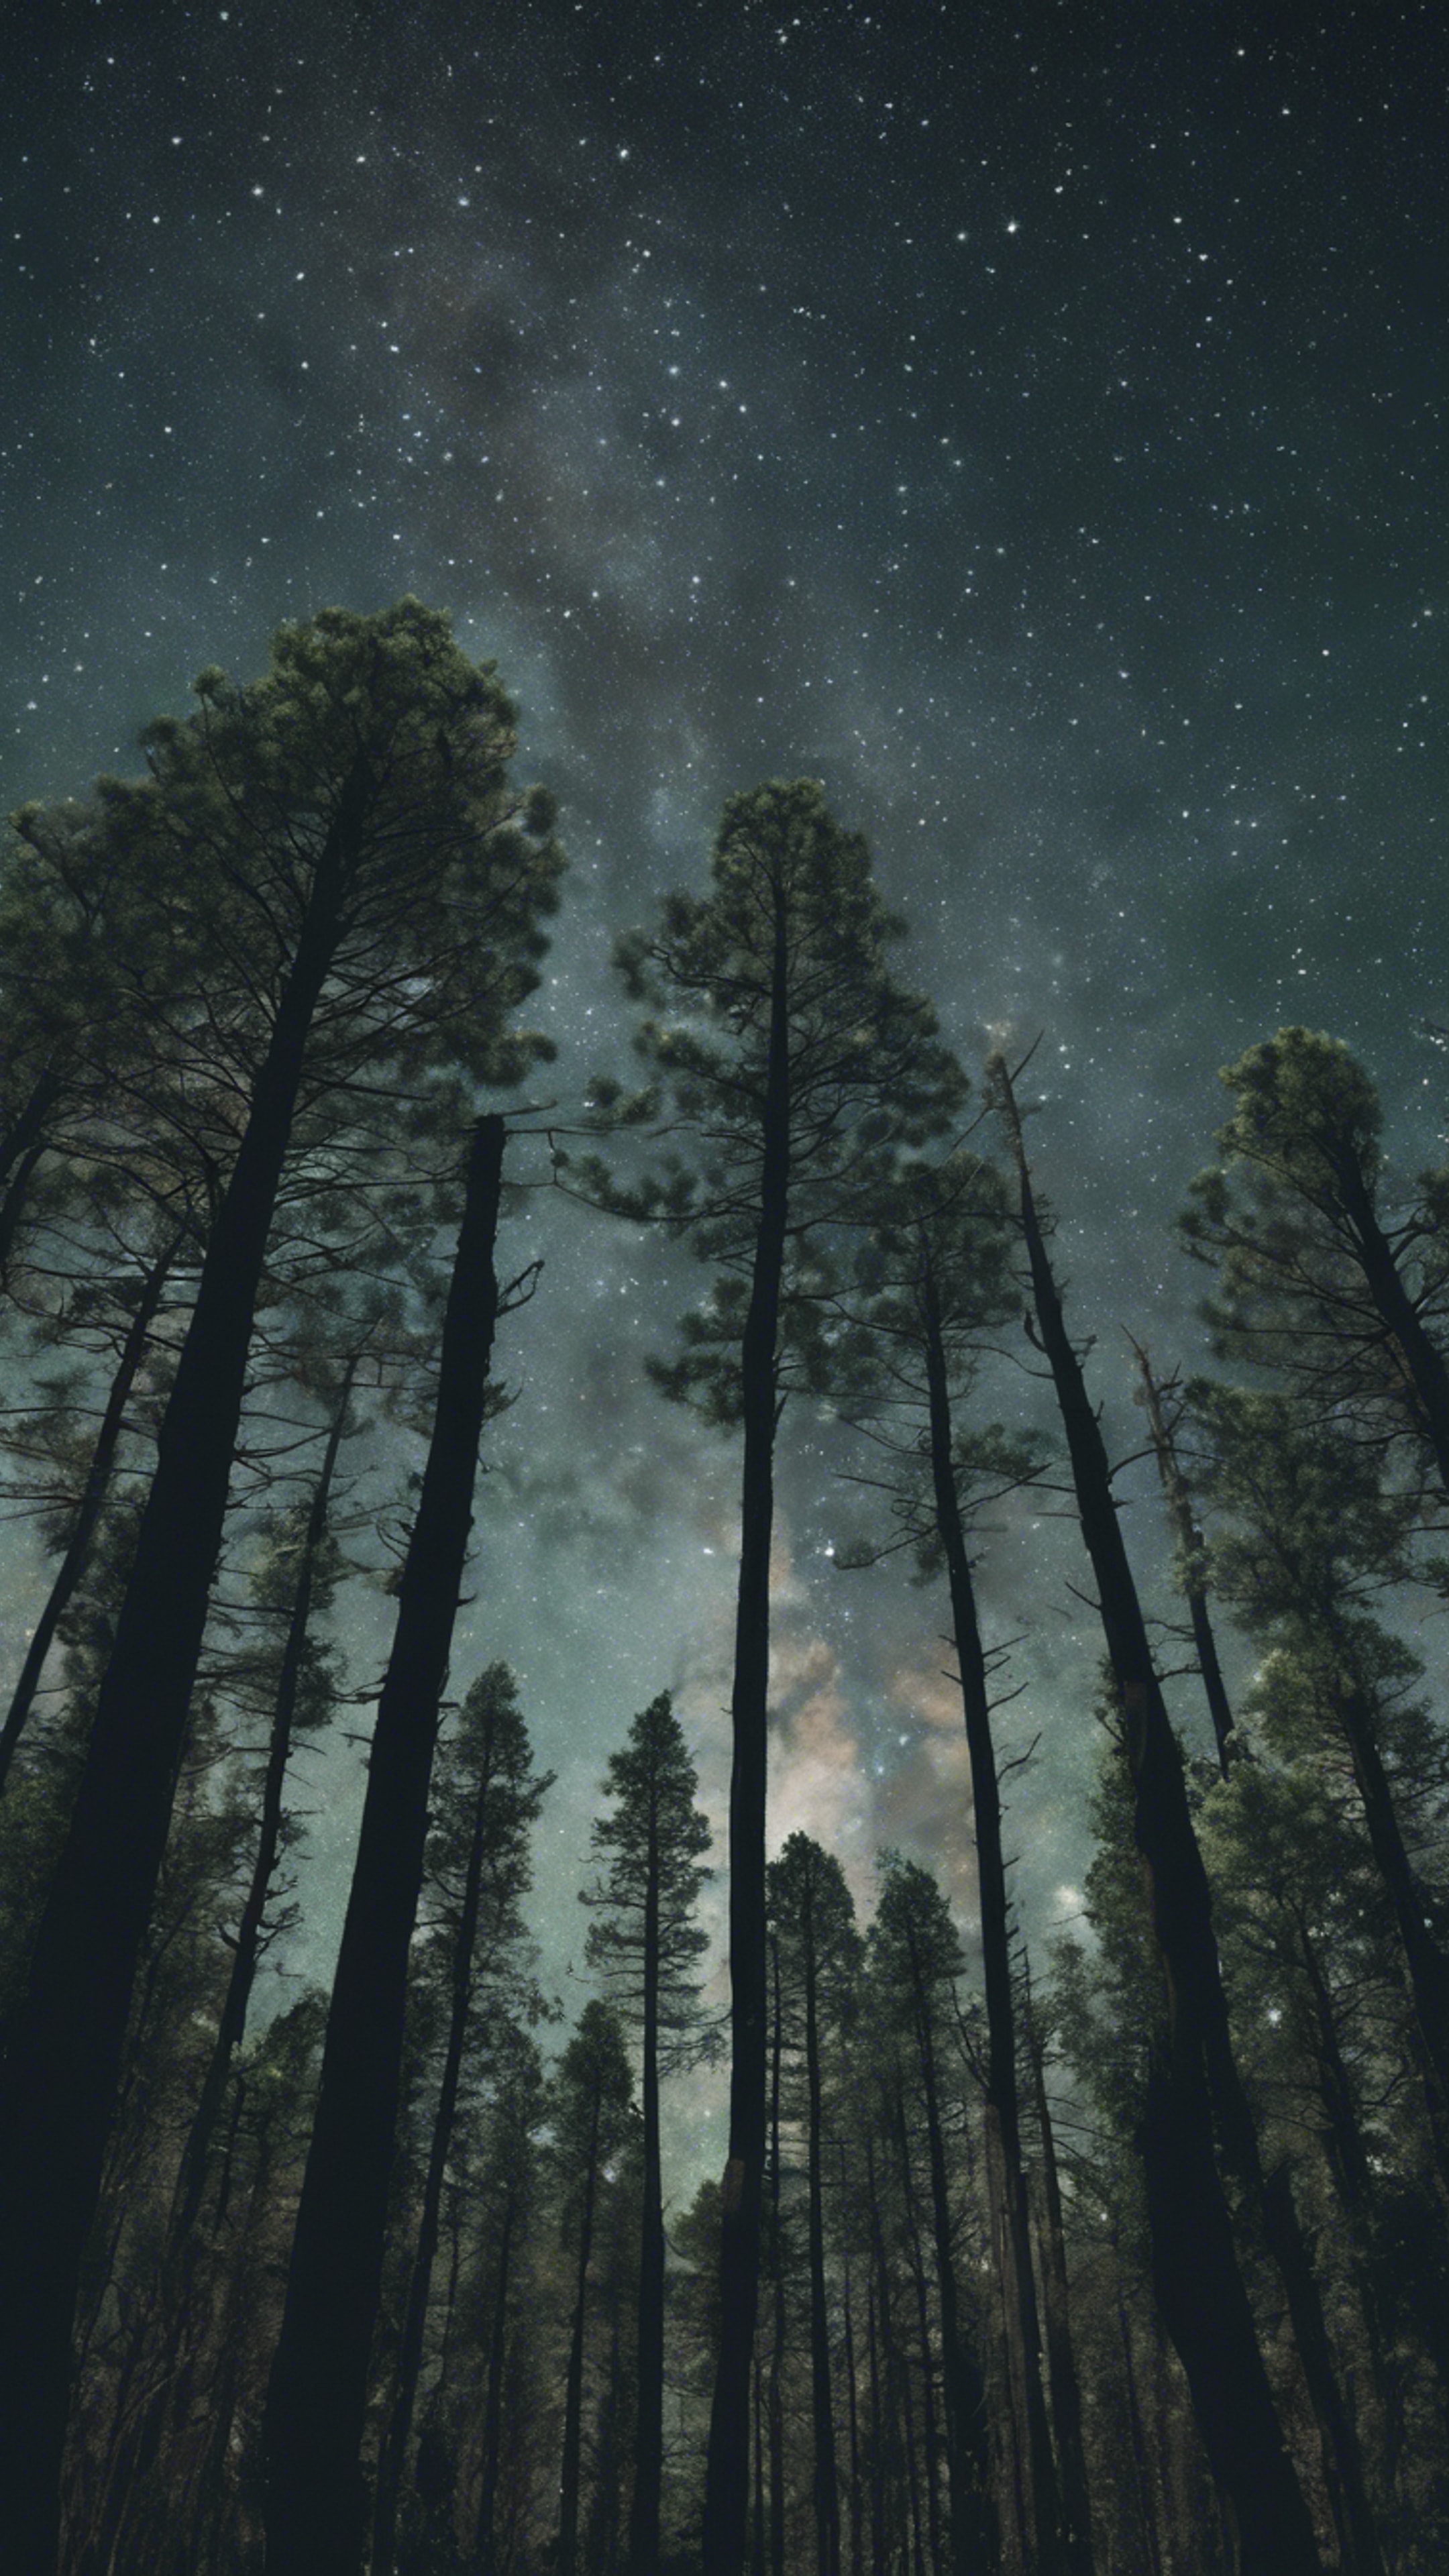 A wilderness scene with tall, dark green pine trees occluding the stars. کاغذ دیواری[a450718e497a48169b60]